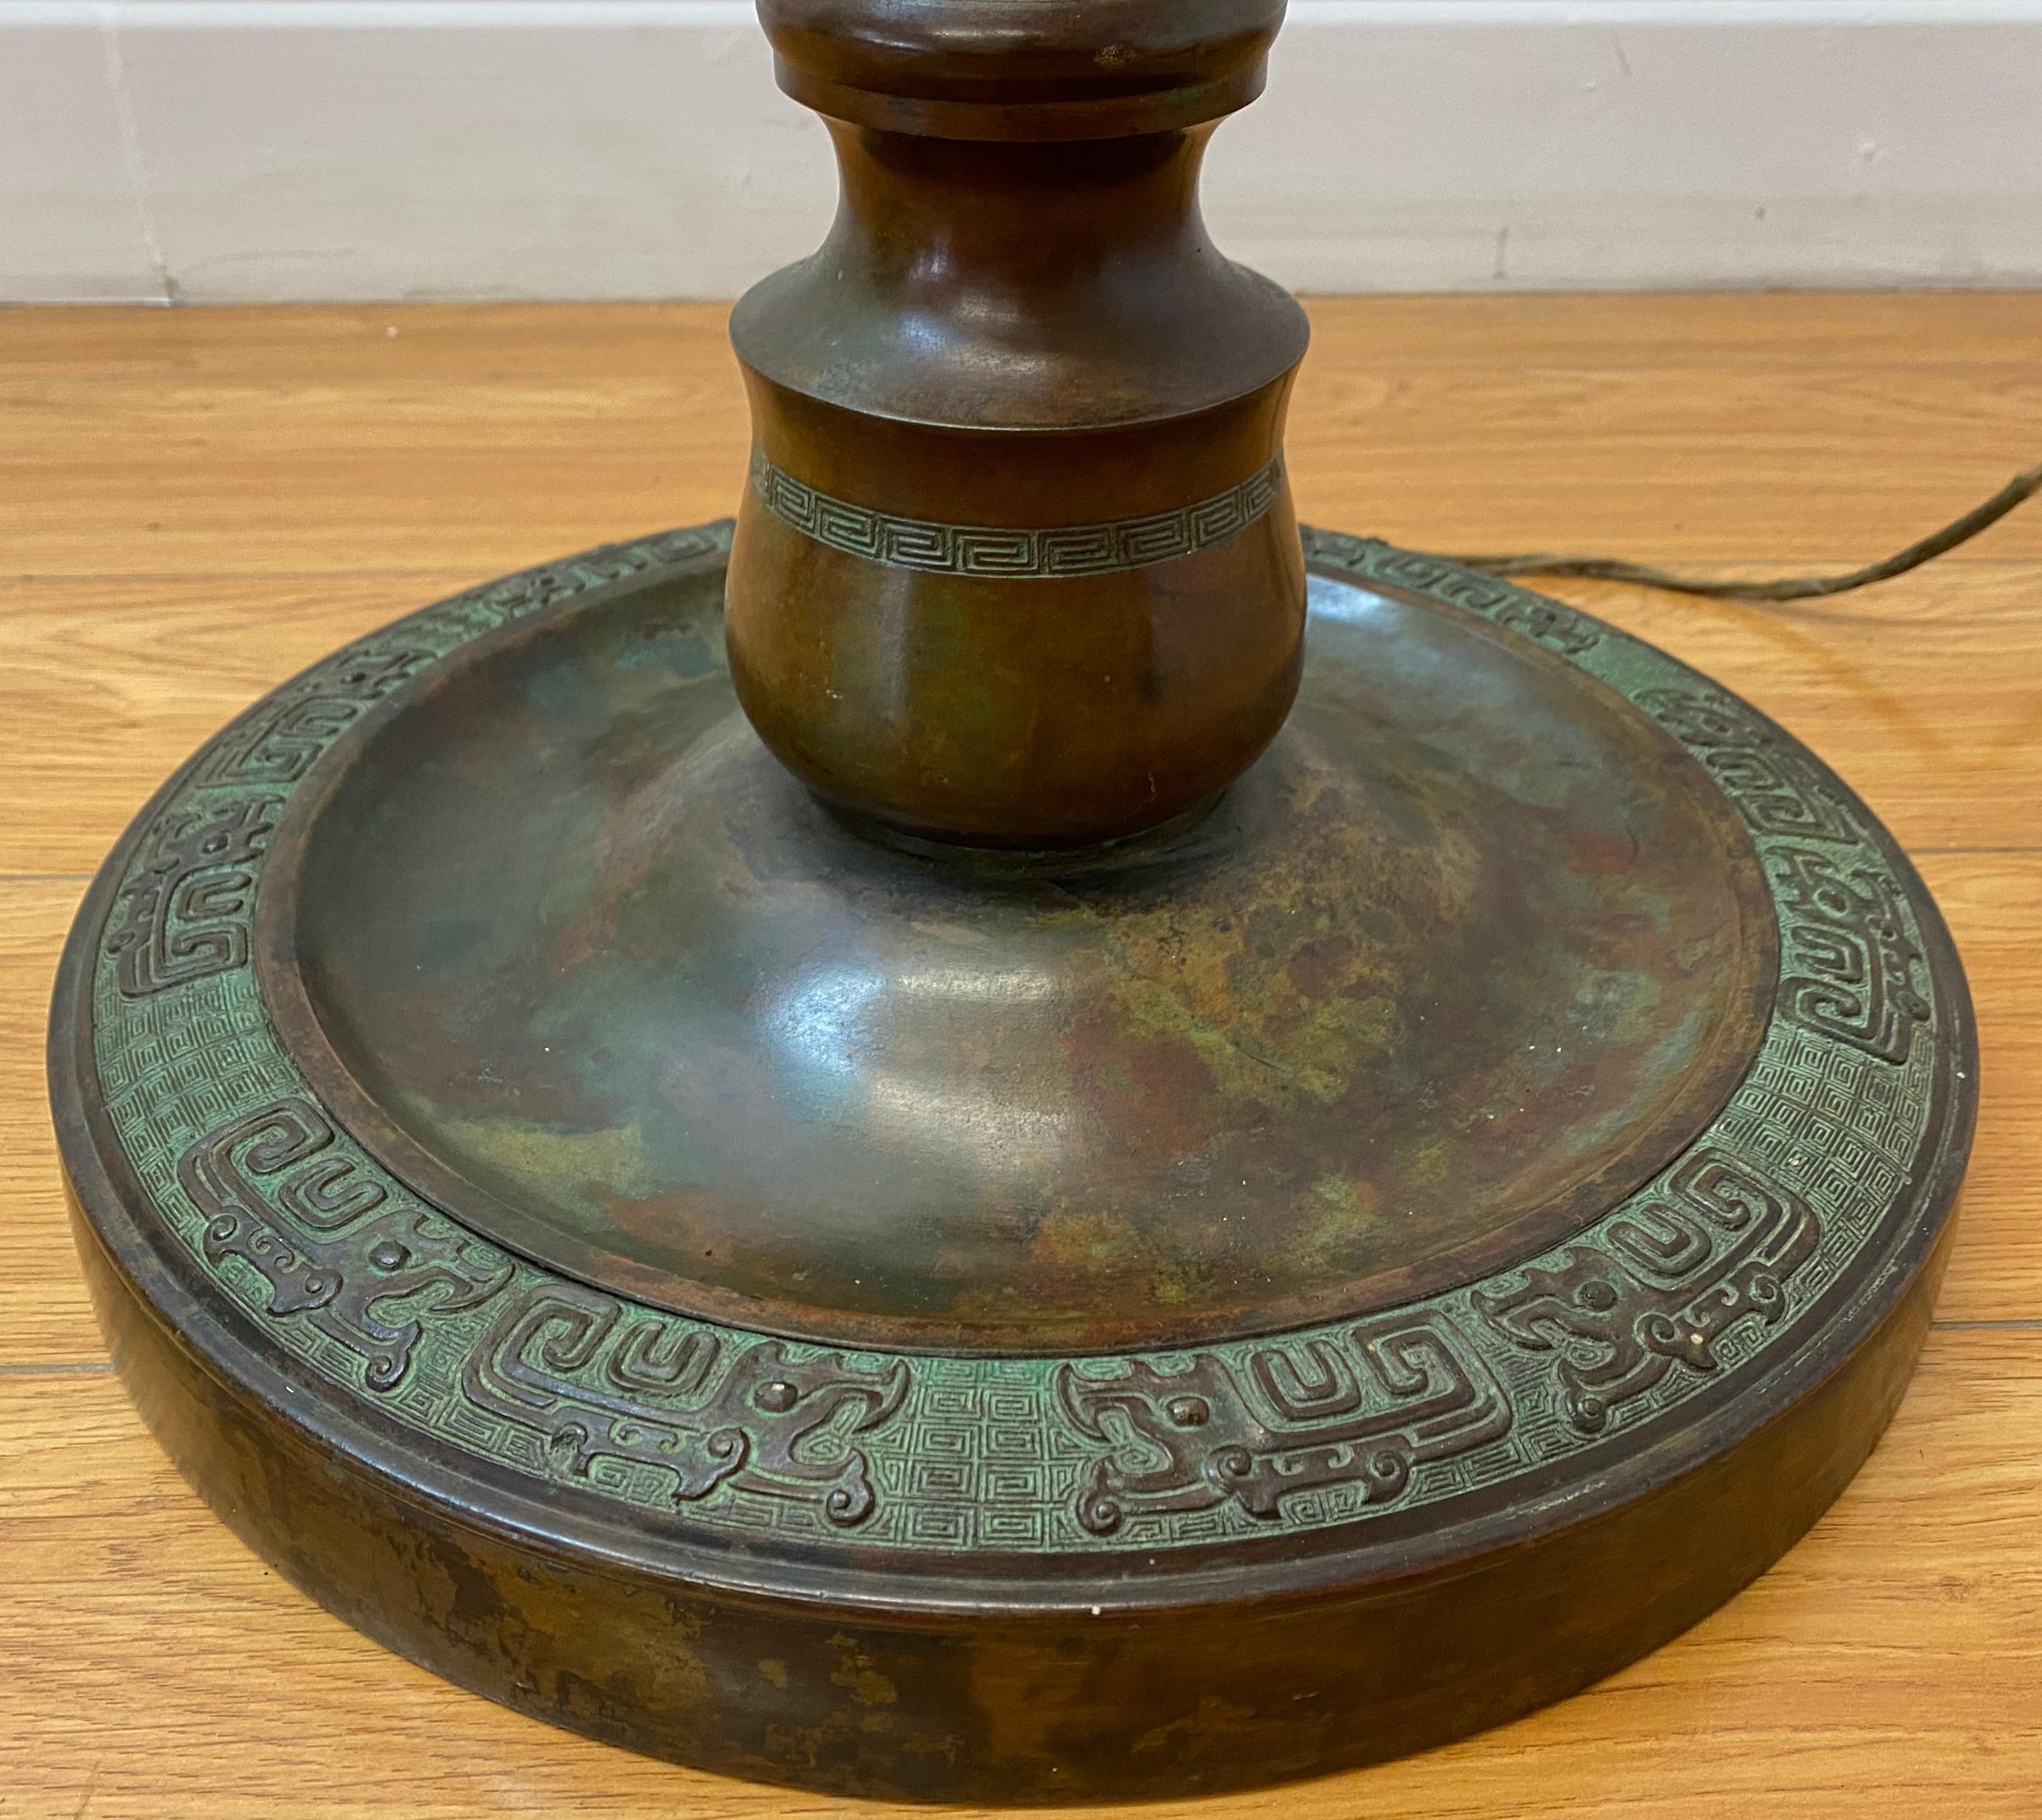 Early 20th century cast bronze floor lamp with neolithic Chinese motif

13